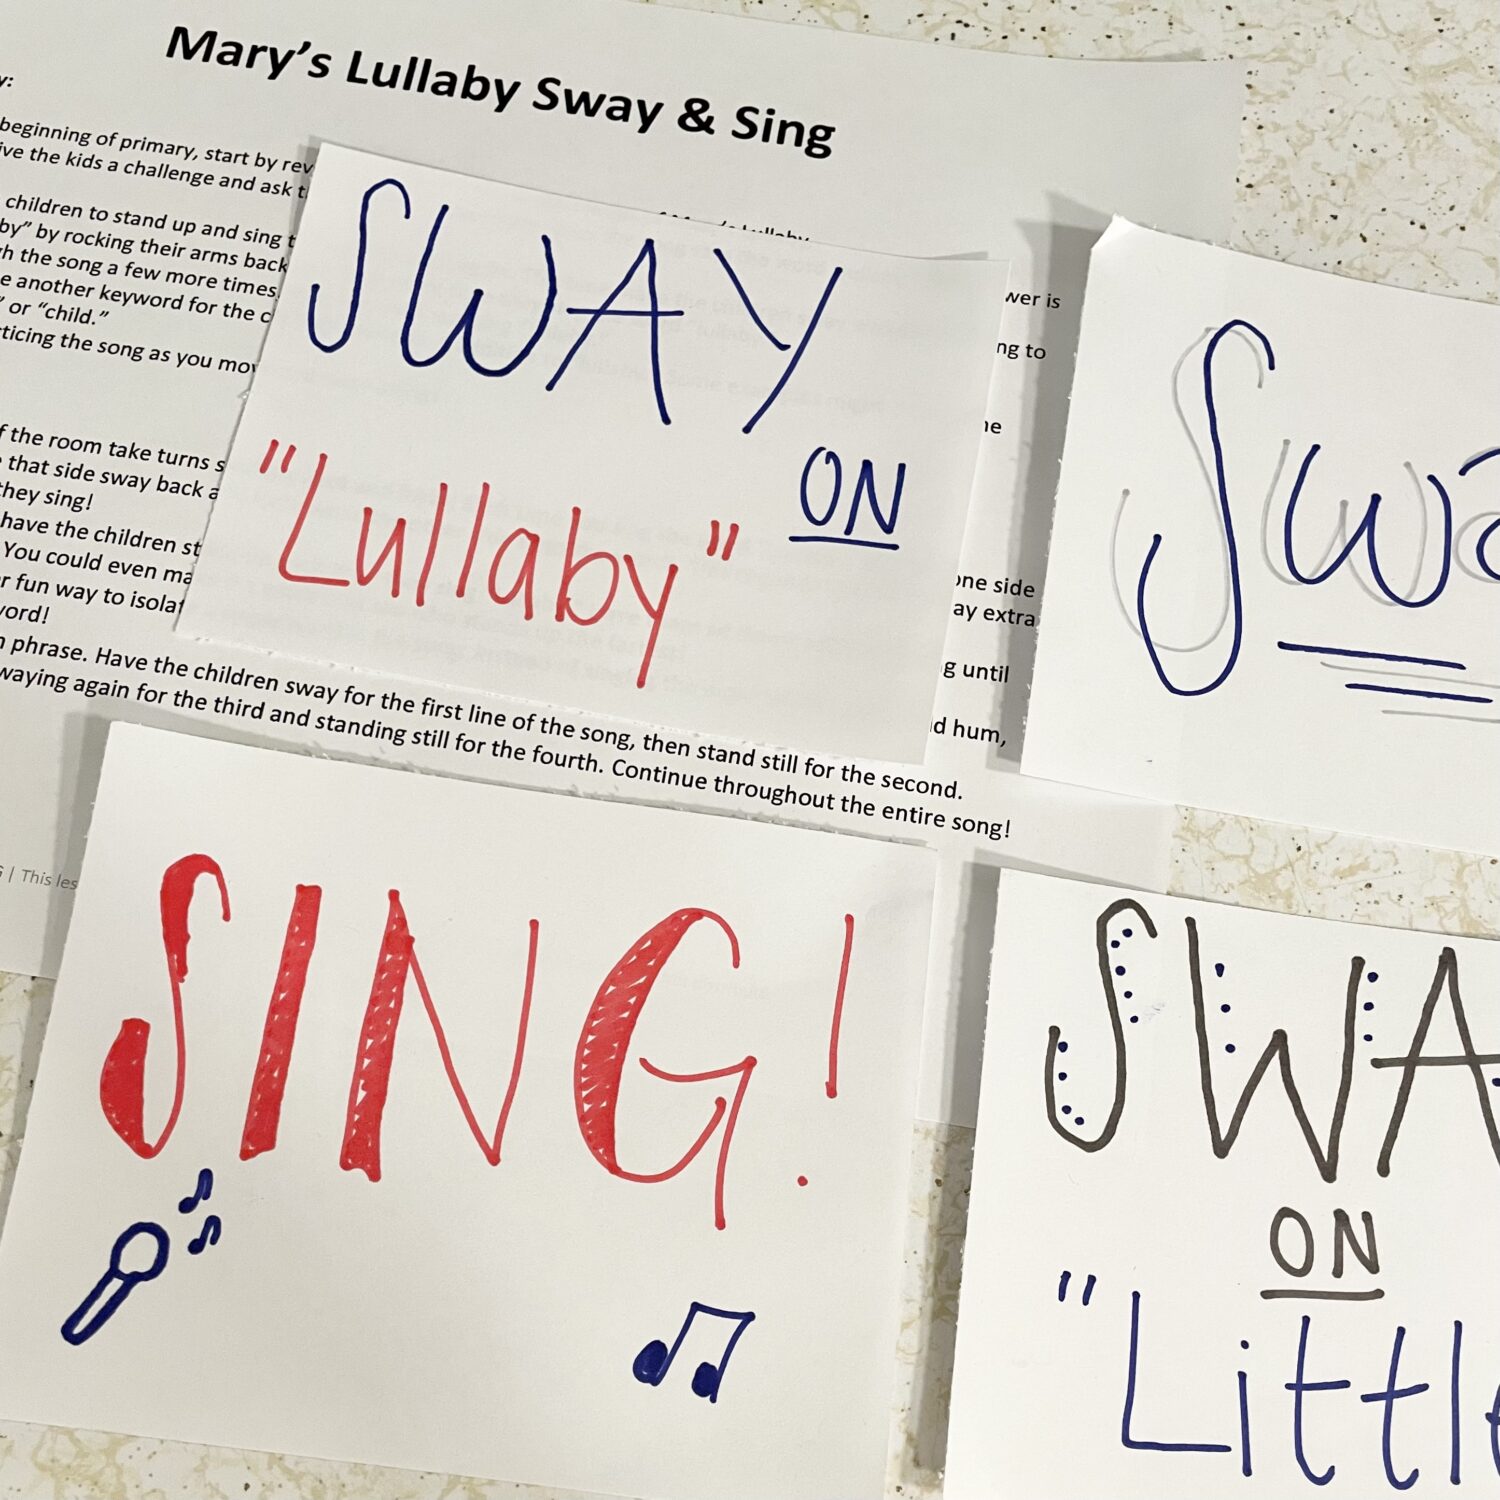 Mary's Lullaby Christmas Song Sway & Sing Easy ideas for Music Leaders IMG 7705